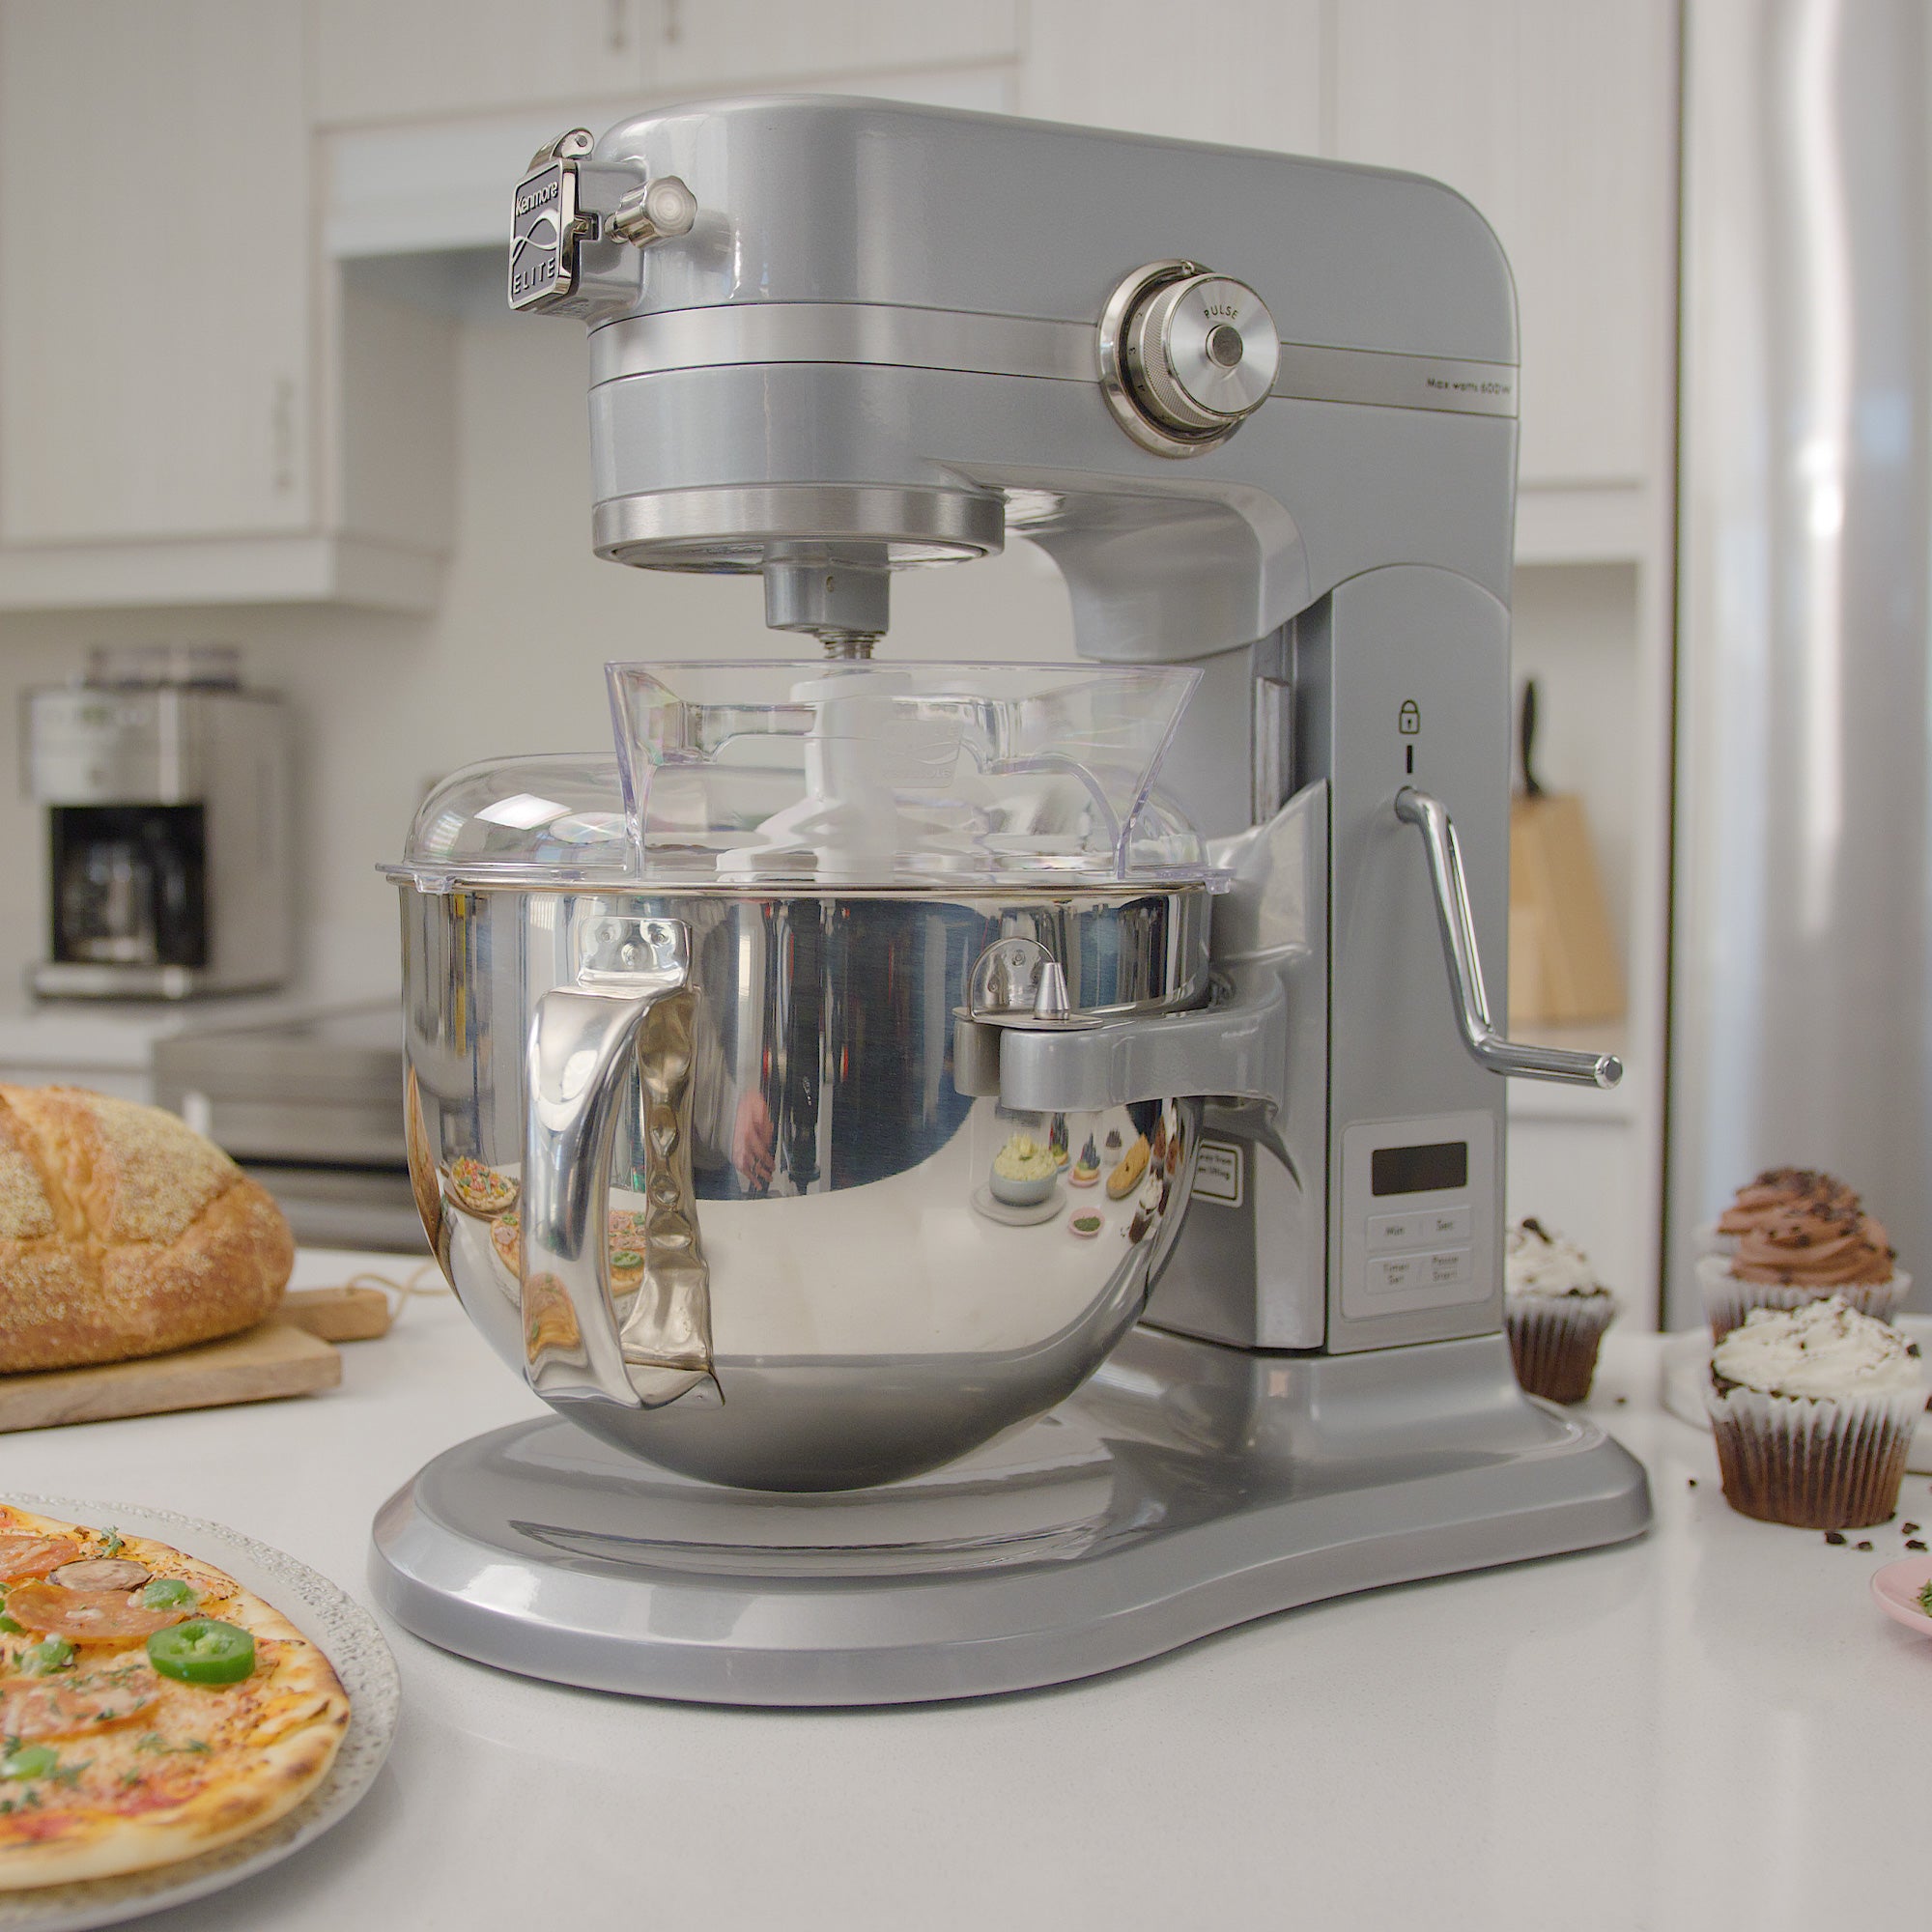 Kenmore bowl-lift stand mixer on a white kitchen counter with a loaf of bread, pizza, and cupcakes arranged around it